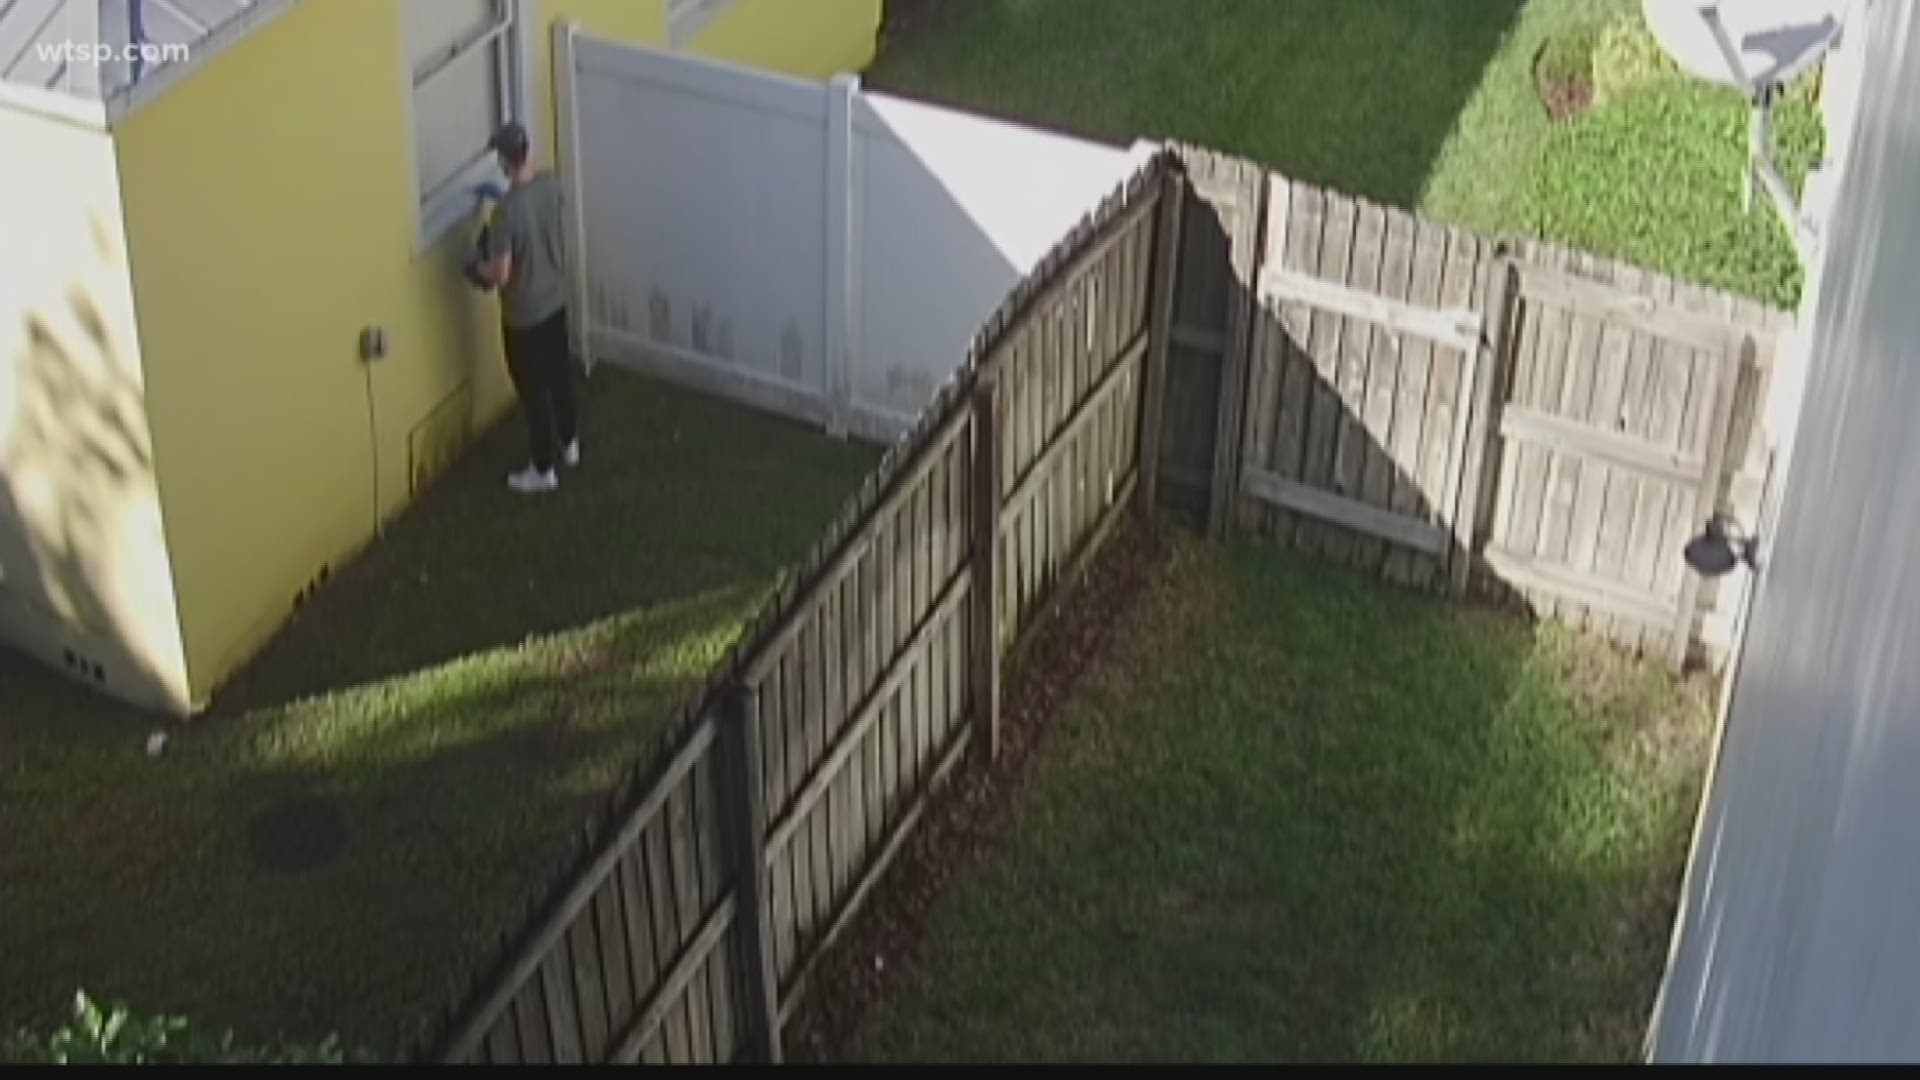 Many people install security systems to alert them to intruders but for one South Tampa family, a signal problem meant not knowing someone was in their home.